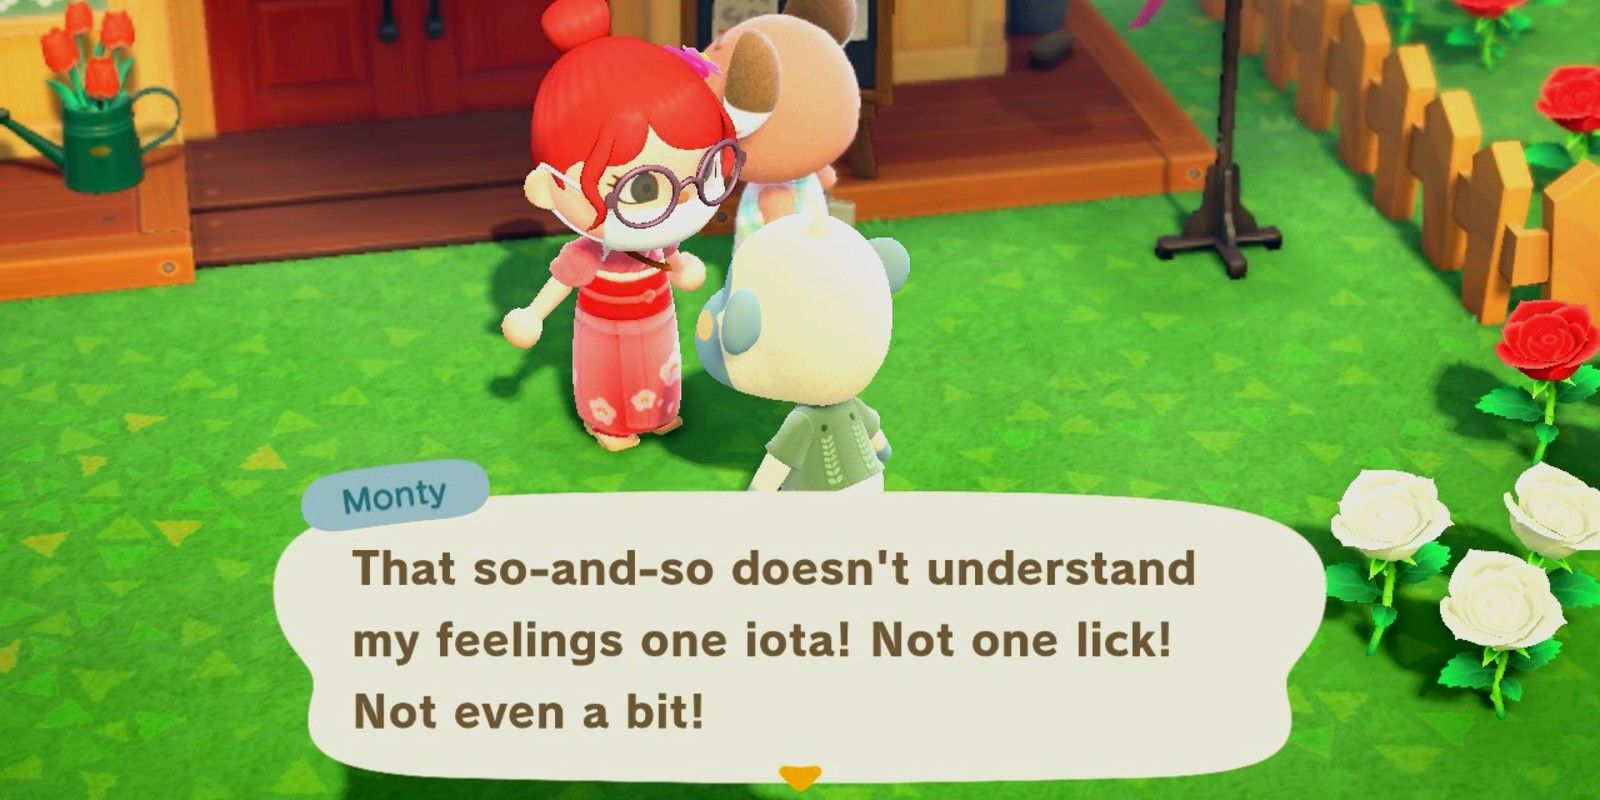 Monty complains about another villager to the player in Animal Crossing: New Horizons